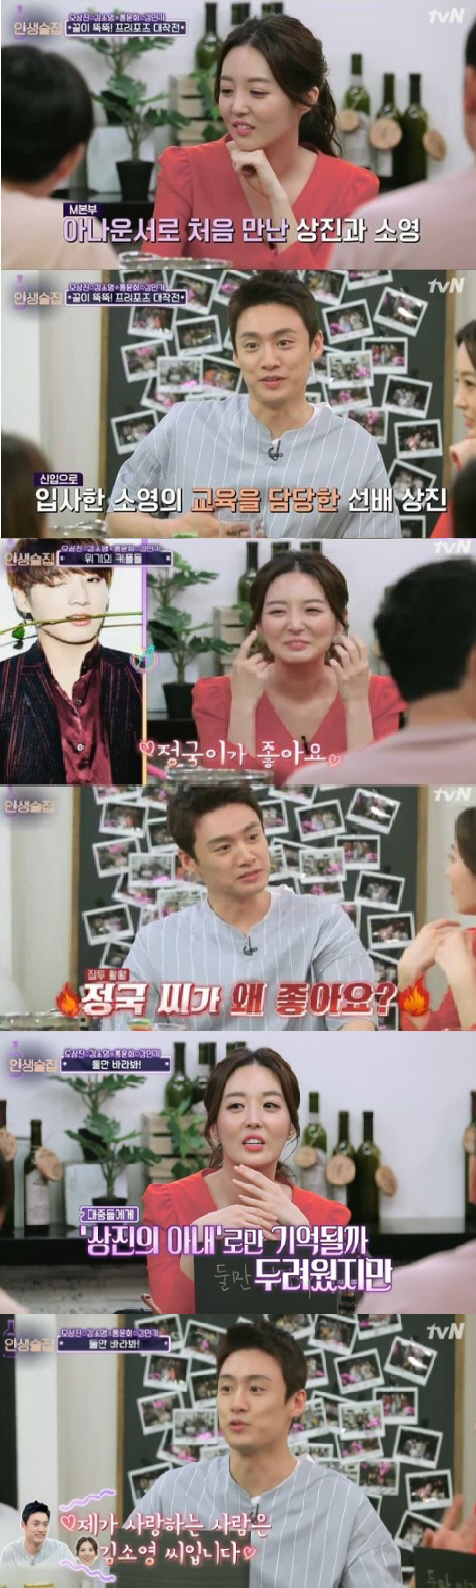 There are no separate couples that encourage Oh Sang-jin and Kim So-young and marriage.Oh Sang-jin Kim So-young couple who showed the envy of viewers and showed honest and sweet appearance every entertainment that appeared together proved once again that it is overwhelming couple.The TVN entertainment program Life Bar broadcasted on the 23rd was decorated with Adult & Moon Couple Special and featured Oh Sang-jin and Kim So-young, comedian Kim Min Ki and Hong Yoon Hwa.In particular, Oh Sang-jin and Kim So-young, who are in the second year of marriage on this day, attracted the attention of pollution from the moment of revealing public devotion to marriage life.On this day, Oh Sang-jin recalled his first meeting with Kim So-young, who met as a junior in MBC announcer. When a new announcer came in, his seniors educated him.At that time, my homeroom was me. I had a good impression then. Oh Sang-jin, who asked Kim So-young to drink alcohol after MBC Leave to borrow alcohol and to make Confessions.But Kim So-young laughed, saying, There is no Confessions Memory that day, I kept saying strange things.Kim So-young, who thought Oh Sang-jin was The Man from Nowhere at the age difference of seven years.I didnt think I could devote myself to this age difference, like The Man from Nowhere.I talked to him then, but he thought he was dating. He laughed and then recalled his love days when he saw his first kiss.Kim So-young has confided in his usual brusque Oh Sang-jin opponent.He said, In my usual time, I usually answer in three letters like Yes and OK, and I wrote my heart in my book.Oh Sang-jin said, I was angry because there was nothing I could not do when I was sick because of the broadcasting station.I wrote it because I had no way to comfort him. Oh Sang-jin and Kim So-young, who are famous for their extensive couples, told another story about the book: Kim So-young is currently running a bookstore.In particular, Oh Sang-jin was envious of saying that he had published it as a book as a honeymoon diary with Kim So-young: I wrote a diary about what happened with Mr. Soyoung for a year.I tied it up and gave it to the book, he explained.On the same day, Oh Sang-jin also revealed Kim So-youngs fanship toward BTS.Oh Sang-jin laughed, saying, There is a place where I put things like the waste in the house, and there is a BTS CD there, it was a sign CD.On this day, Kim So-young conveyed his candid thoughts about being Memory to the public as Oh Sang-jins wife.Kim So-young, who opened his mouth honestly, said, But it was not important because I was marriage.Husband is not the person who stays next to me when I am the shabbyest. Oh Sang-jin expressed a greater heart for Kim So-young, who even spared the expression of respect beyond love, saying: So Young is a woman I can really admire.So I think, I will do well only in my own mind. On the other hand, tvN Life Bar is broadcast every Thursday night at 11 pm.